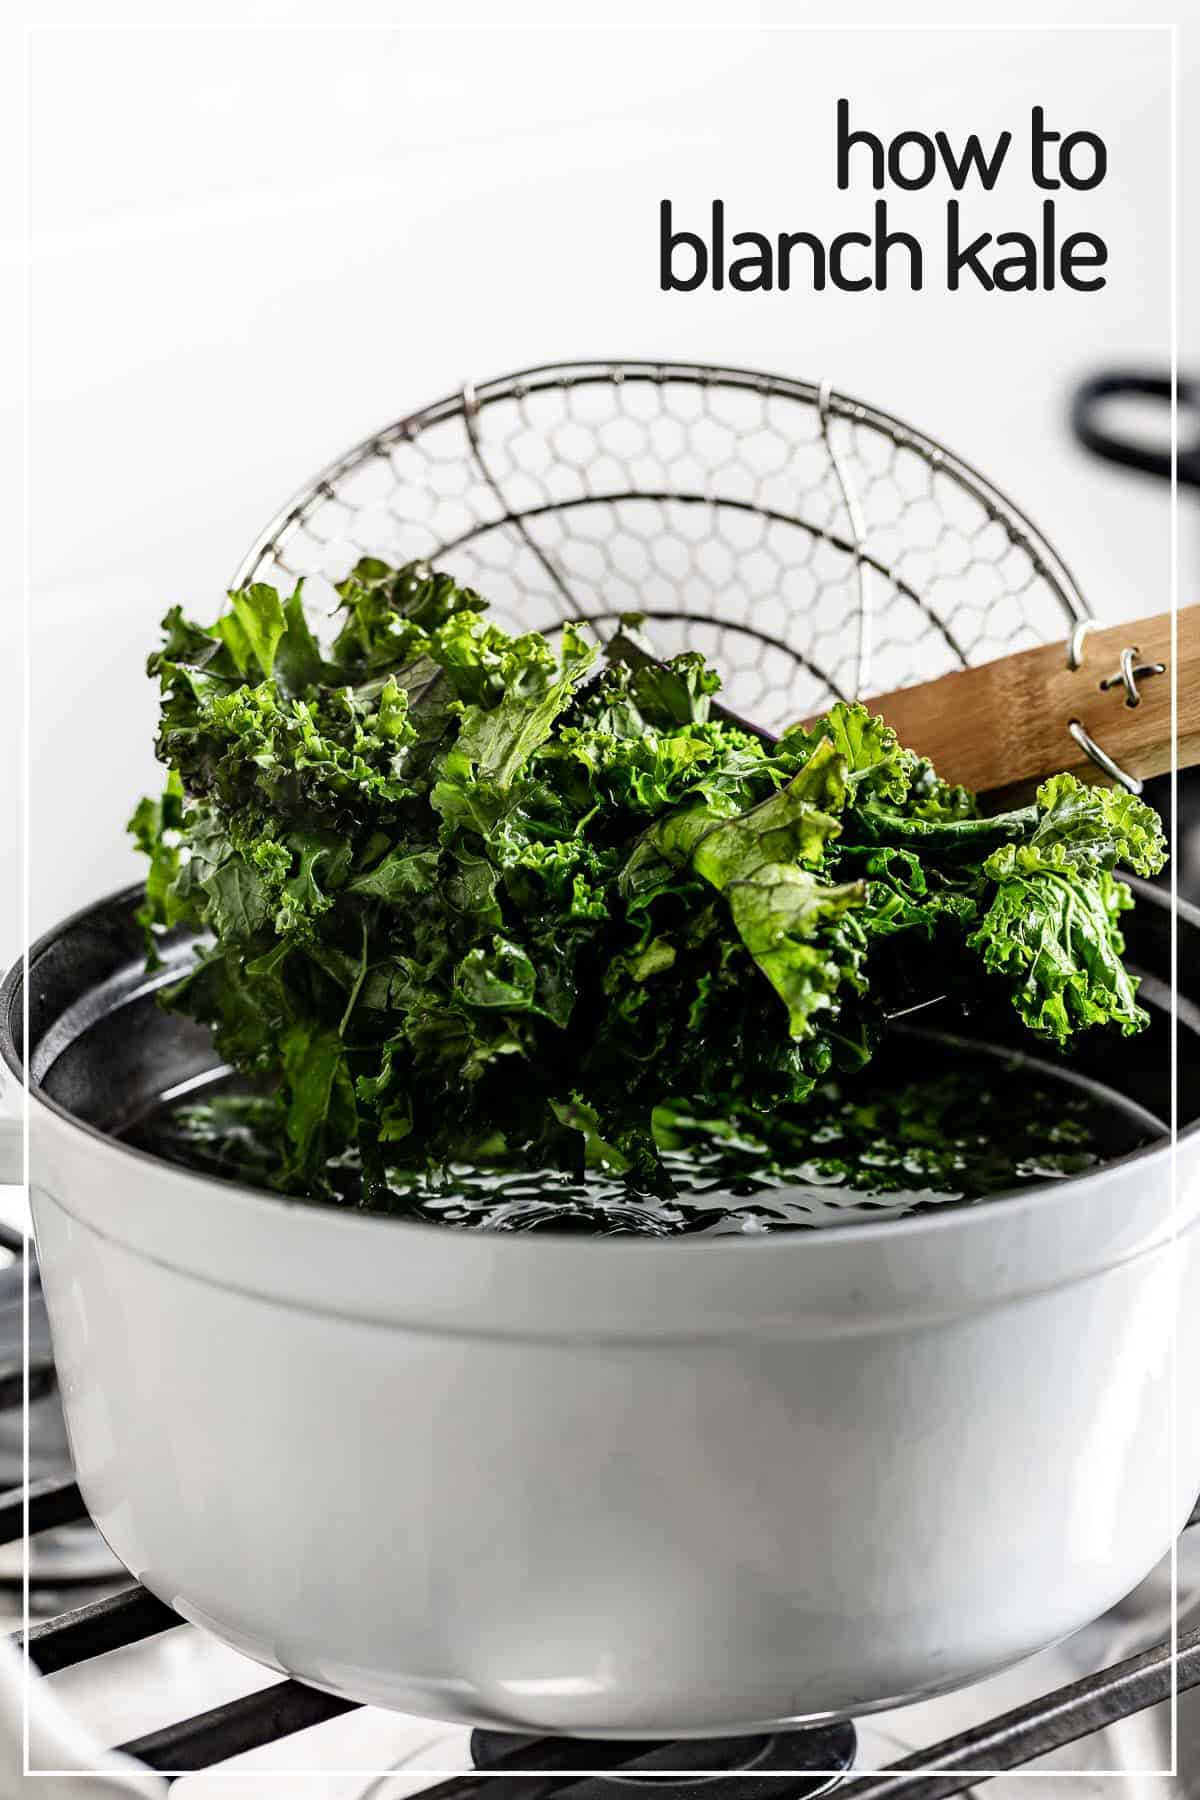 A person removing blanched kale from a pot of water from the side view.